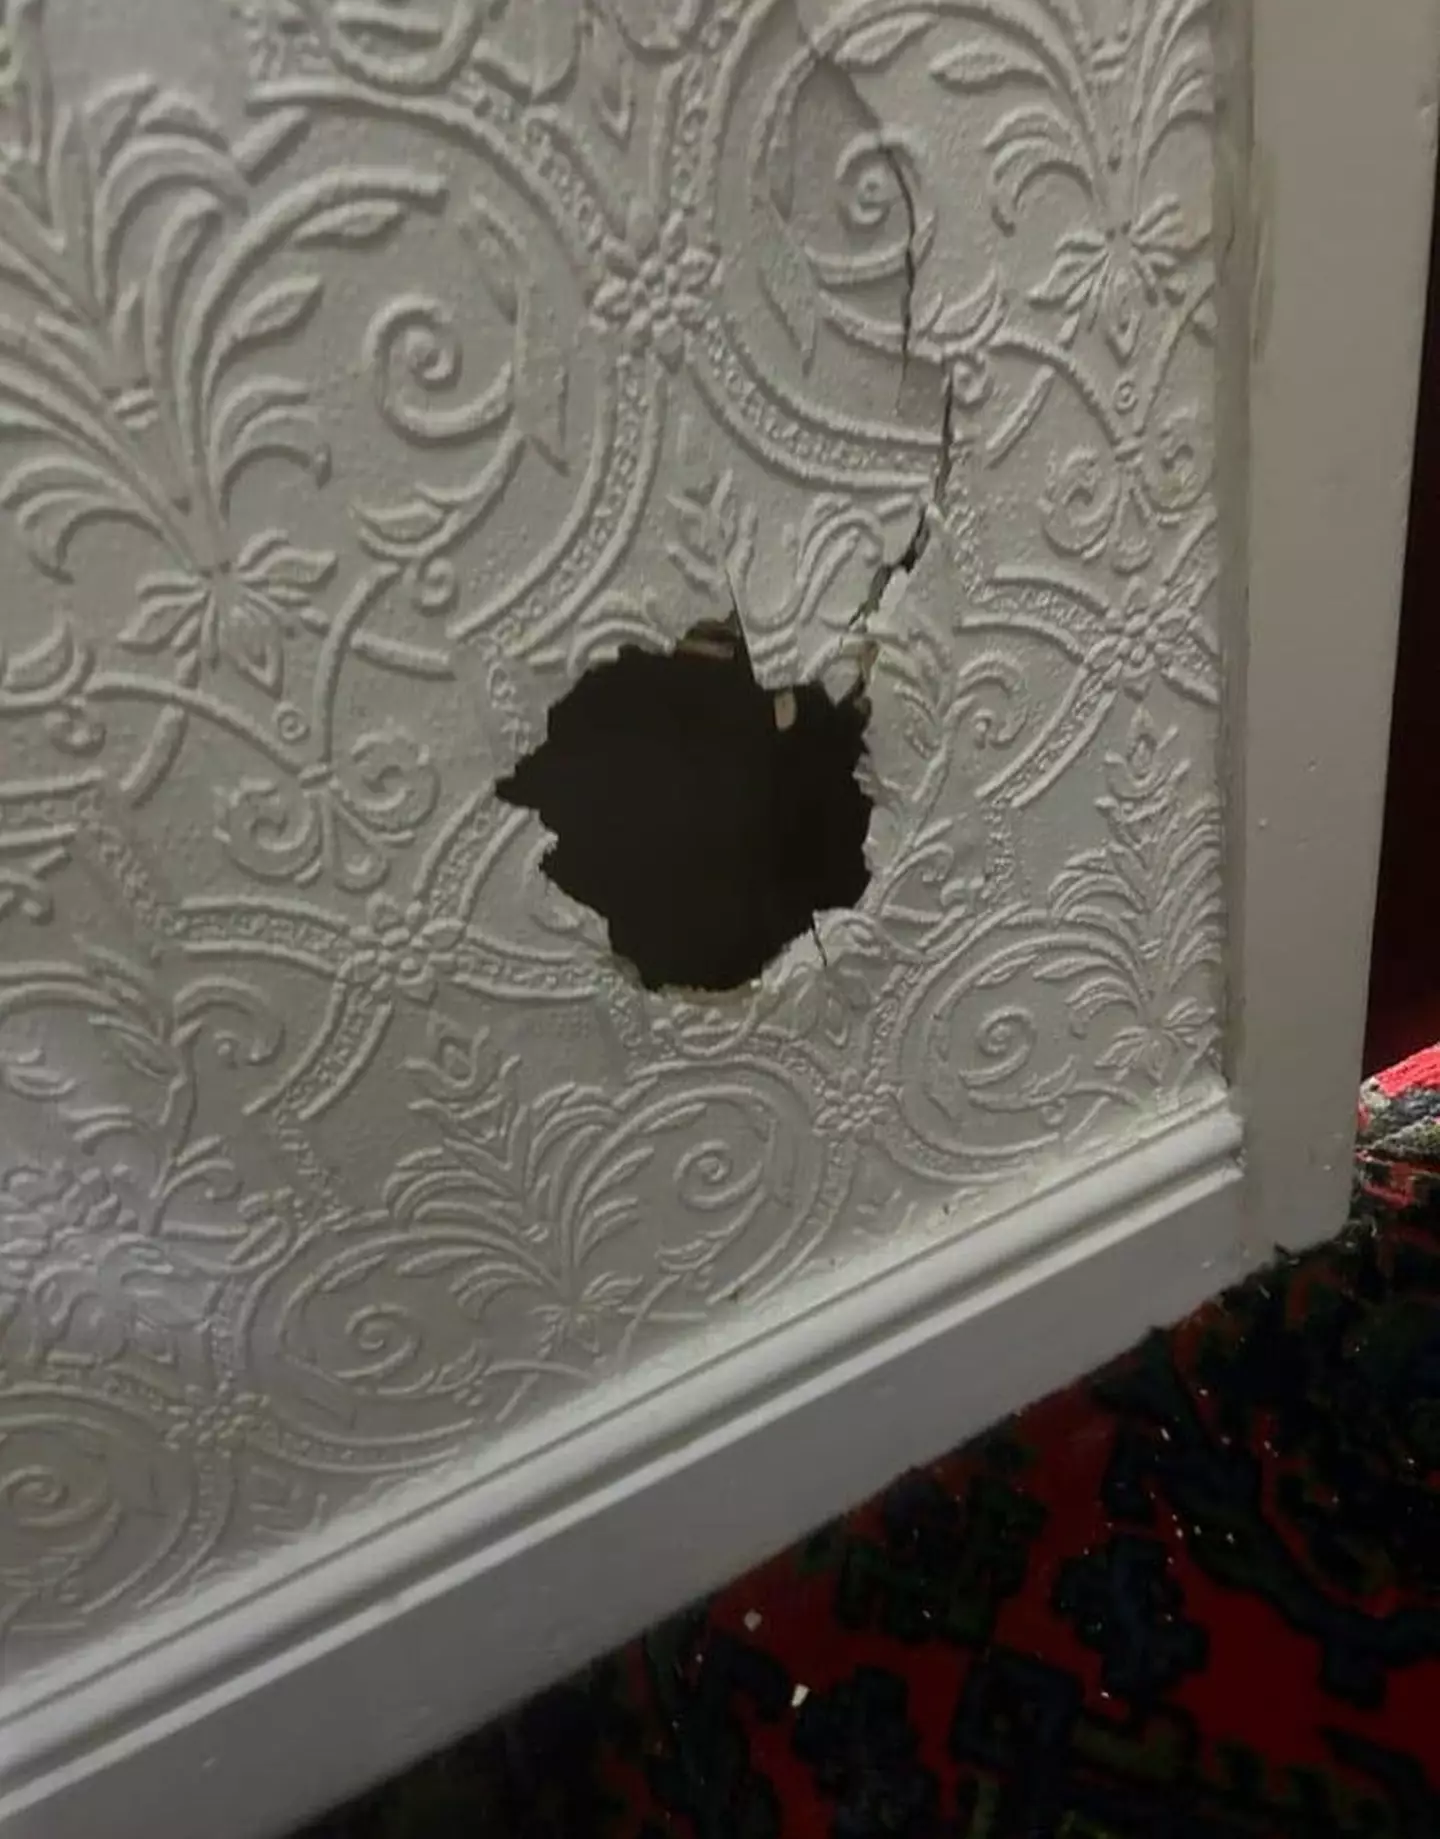 The family took pictures of holes in the walls of the hotel.